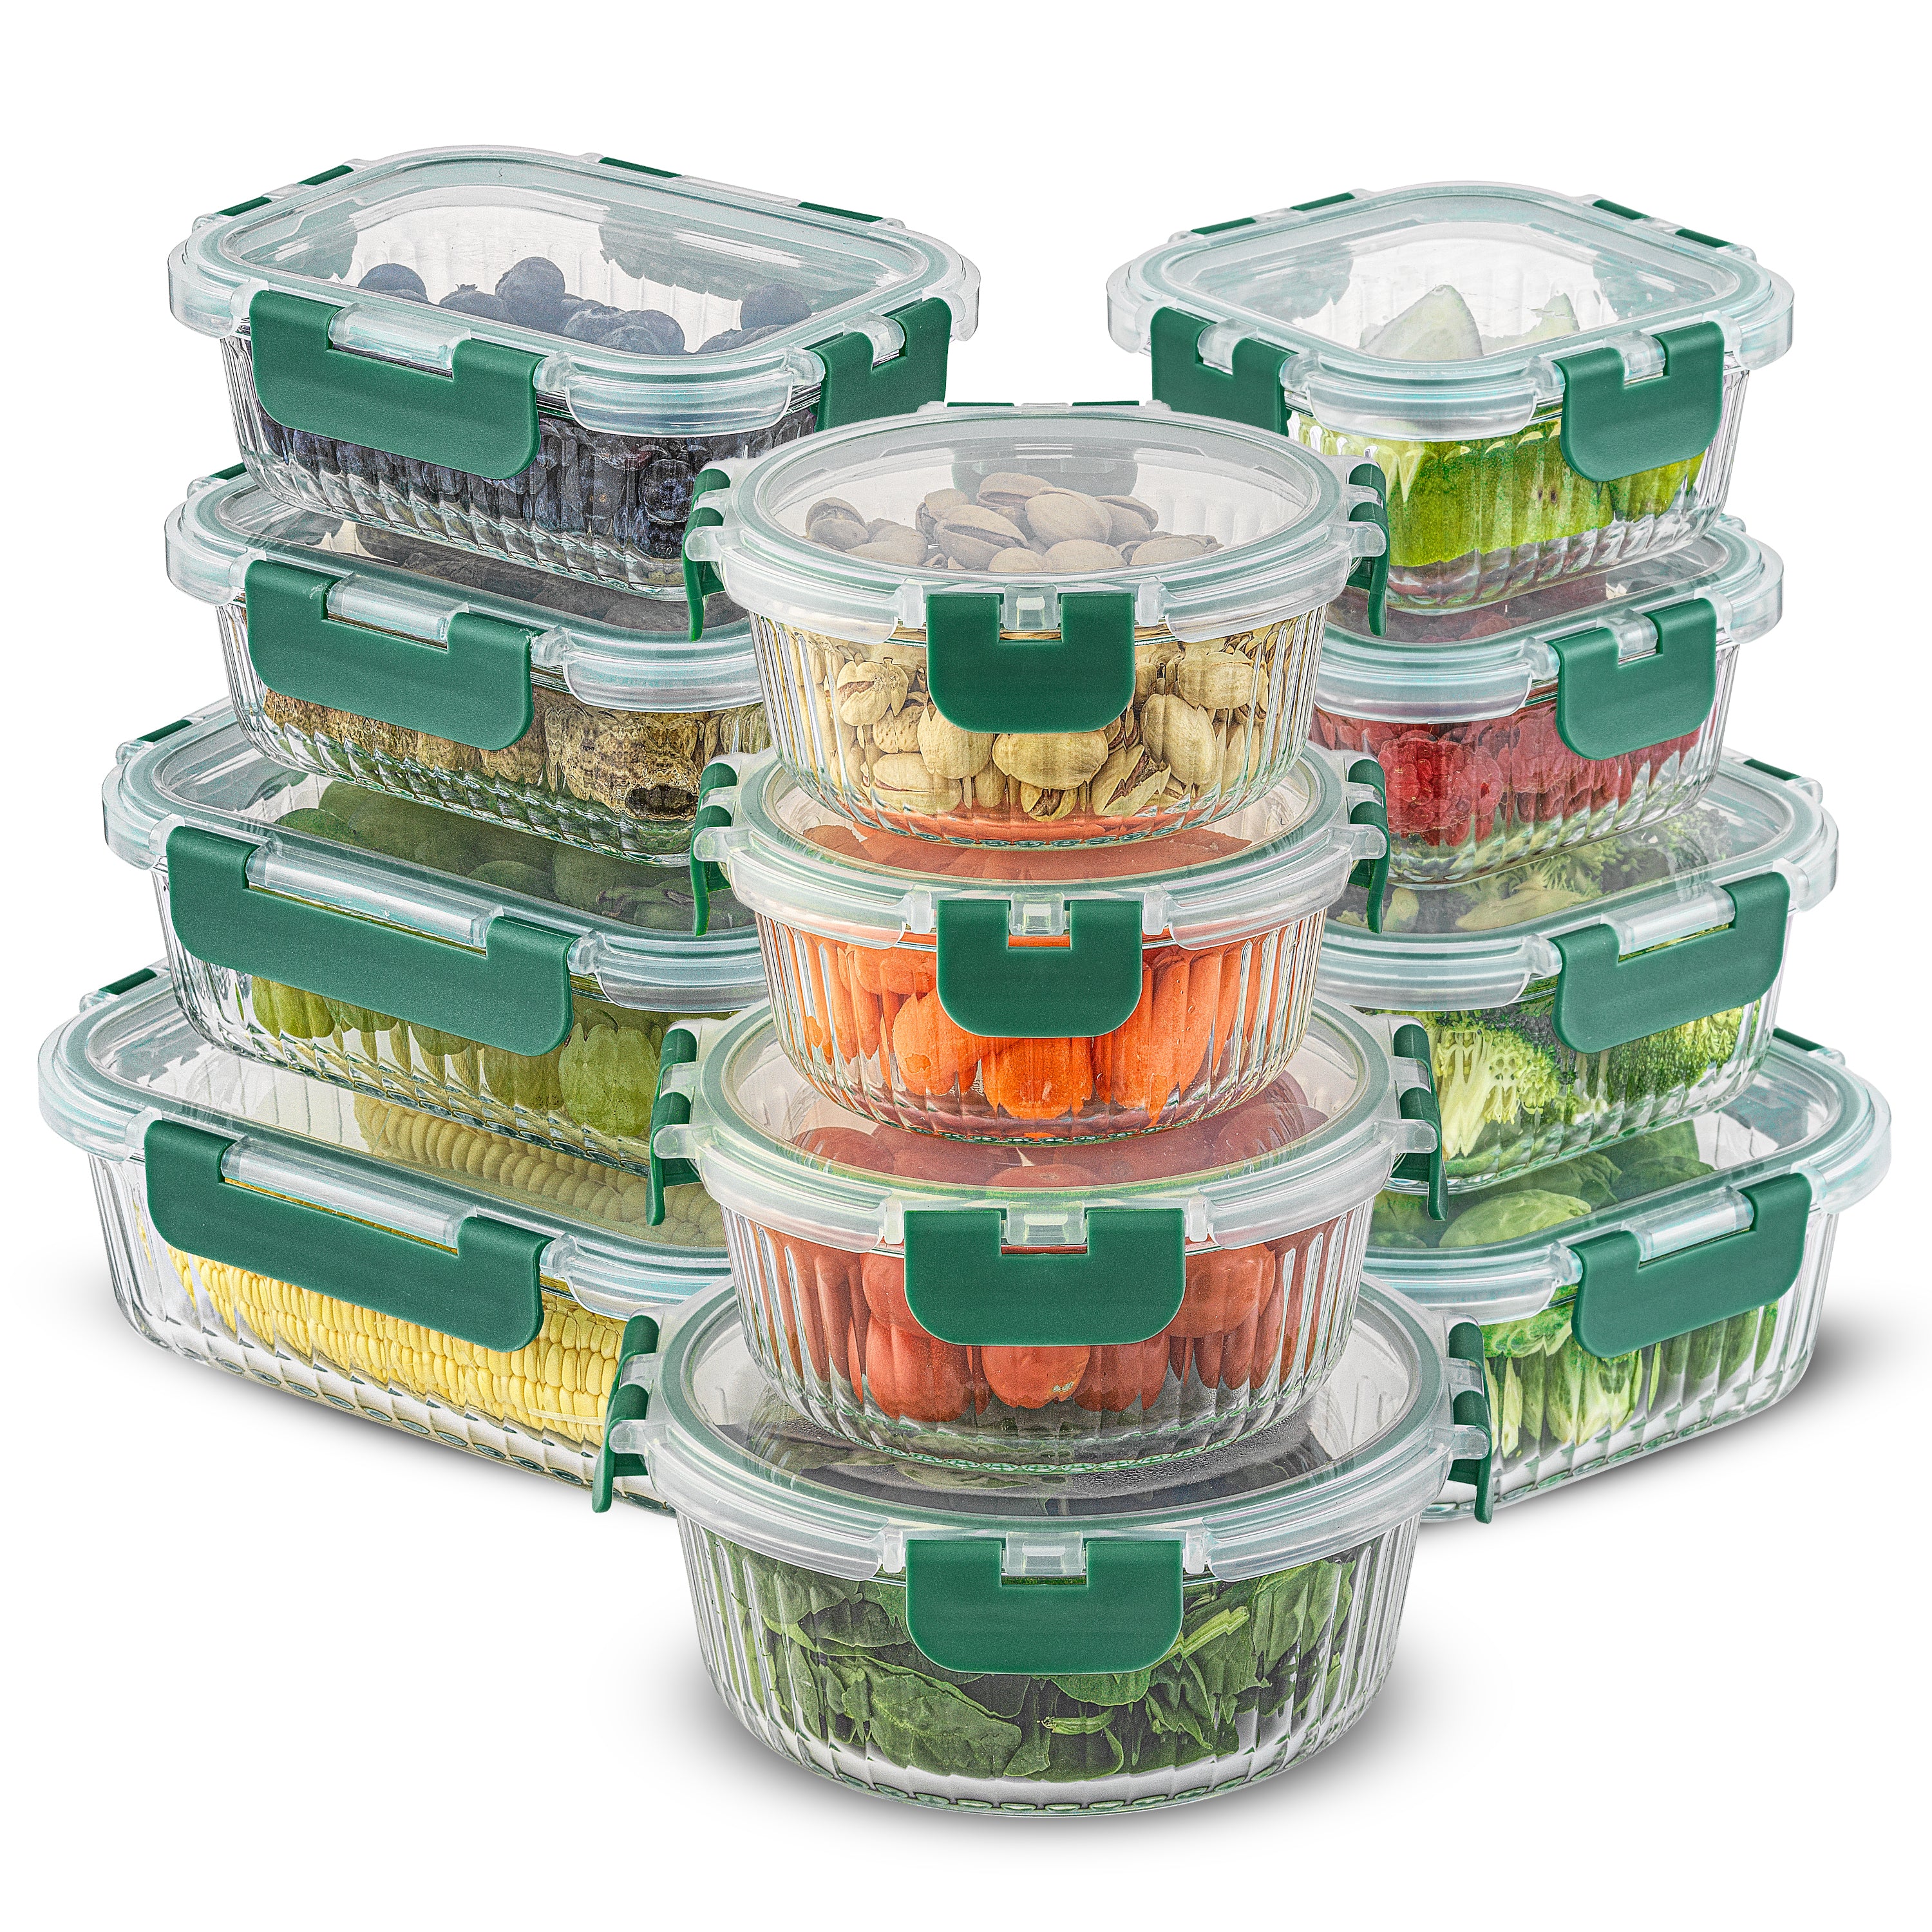 JoyJolt 12 Piece Fluted Glass Storage Containers with Leakproof Lids Set